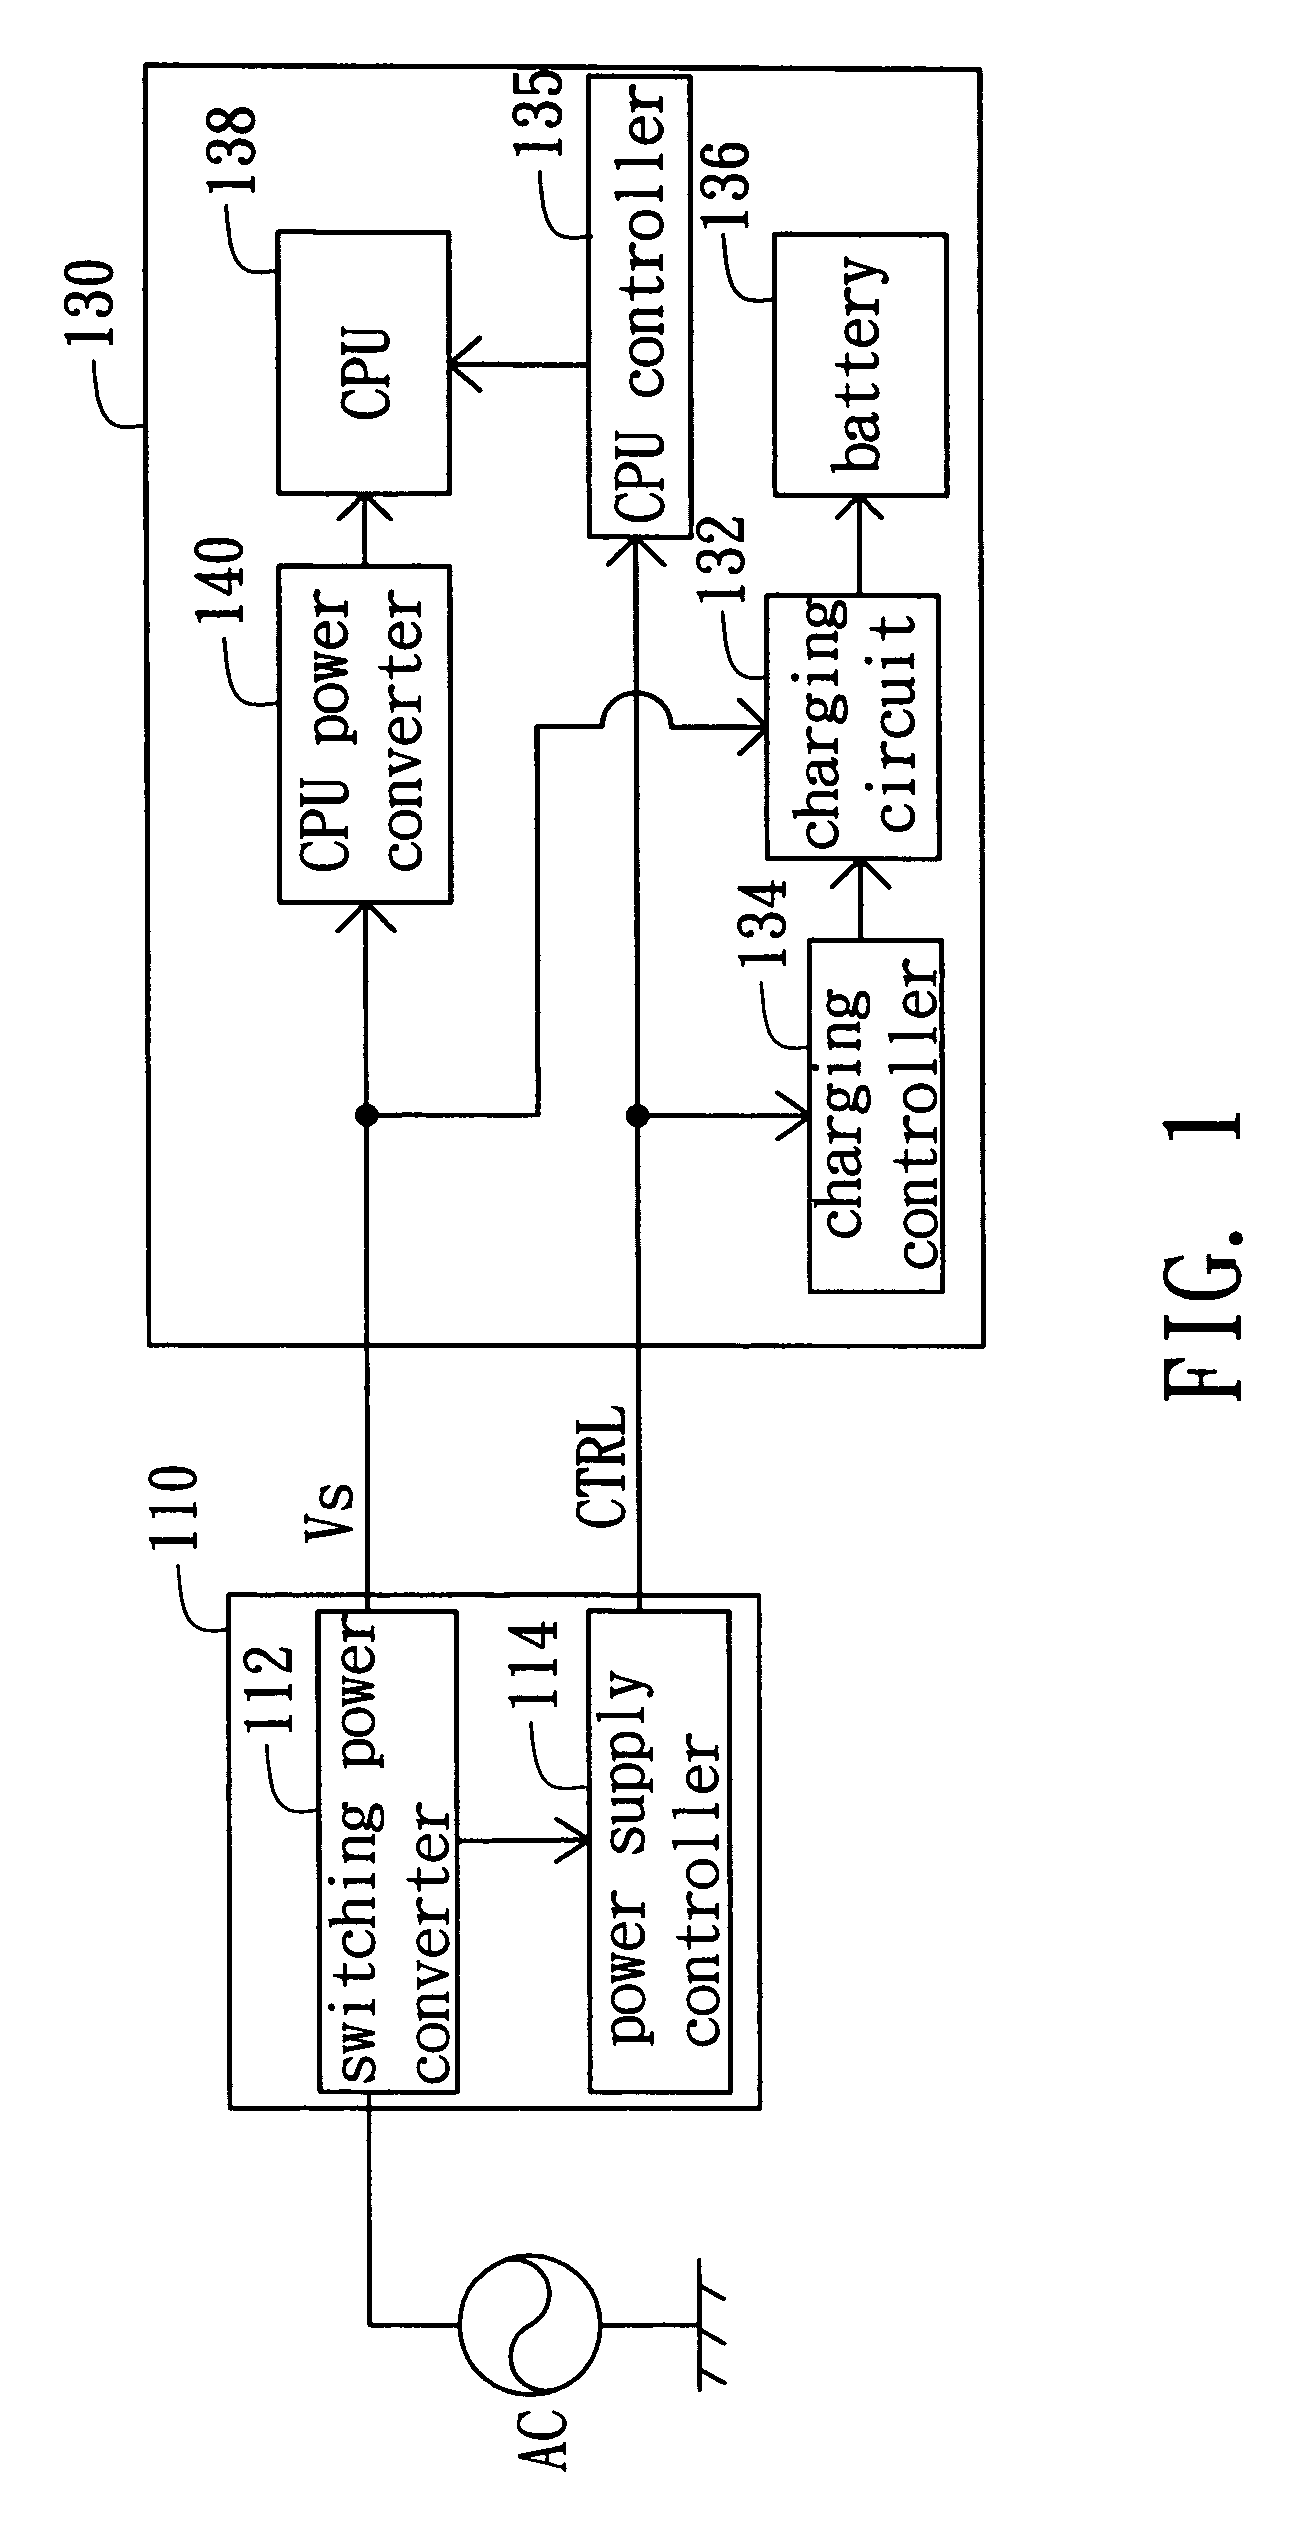 Electronic apparatus capable of effectively using power of an AC/DC adaptor